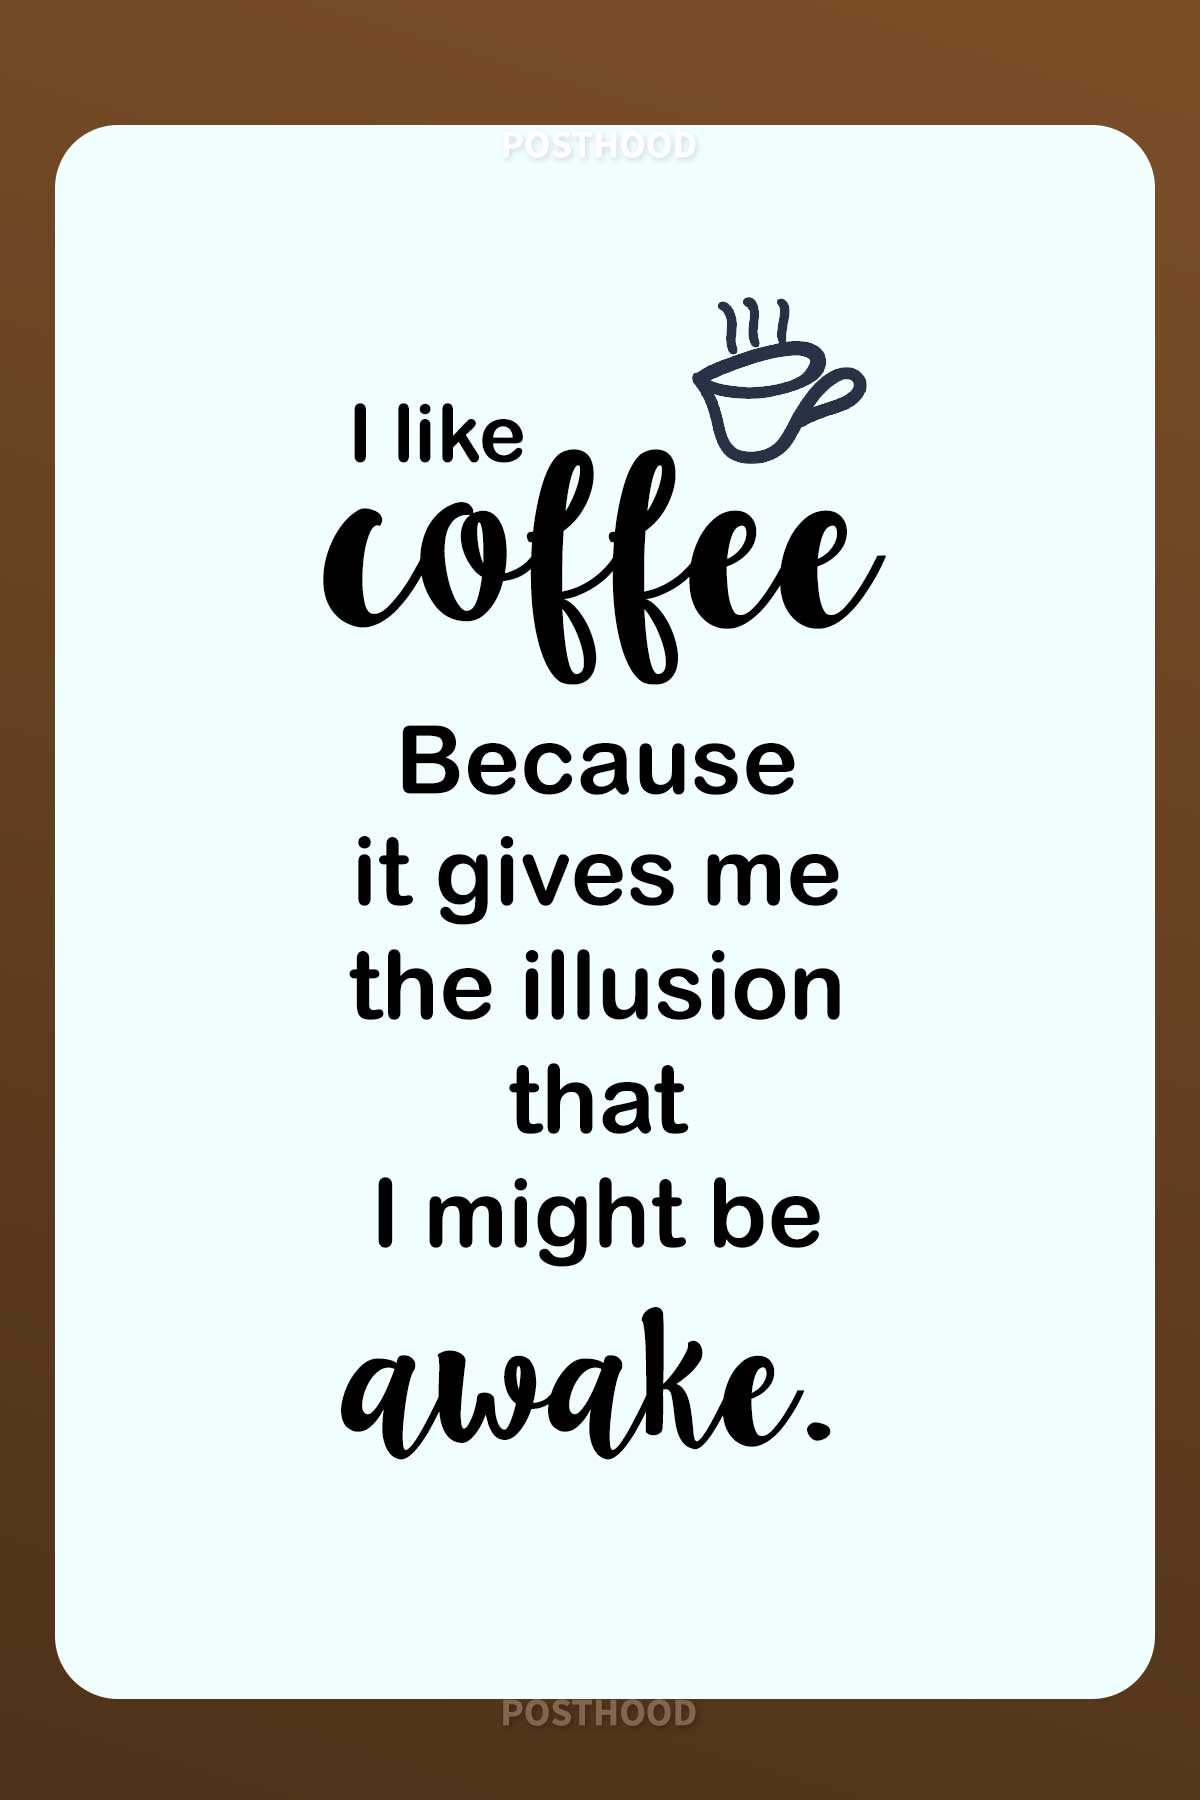 80 fun and humorous coffee quotes about how coffee is the most important part of your every morning. Best good morning coffee quotes.